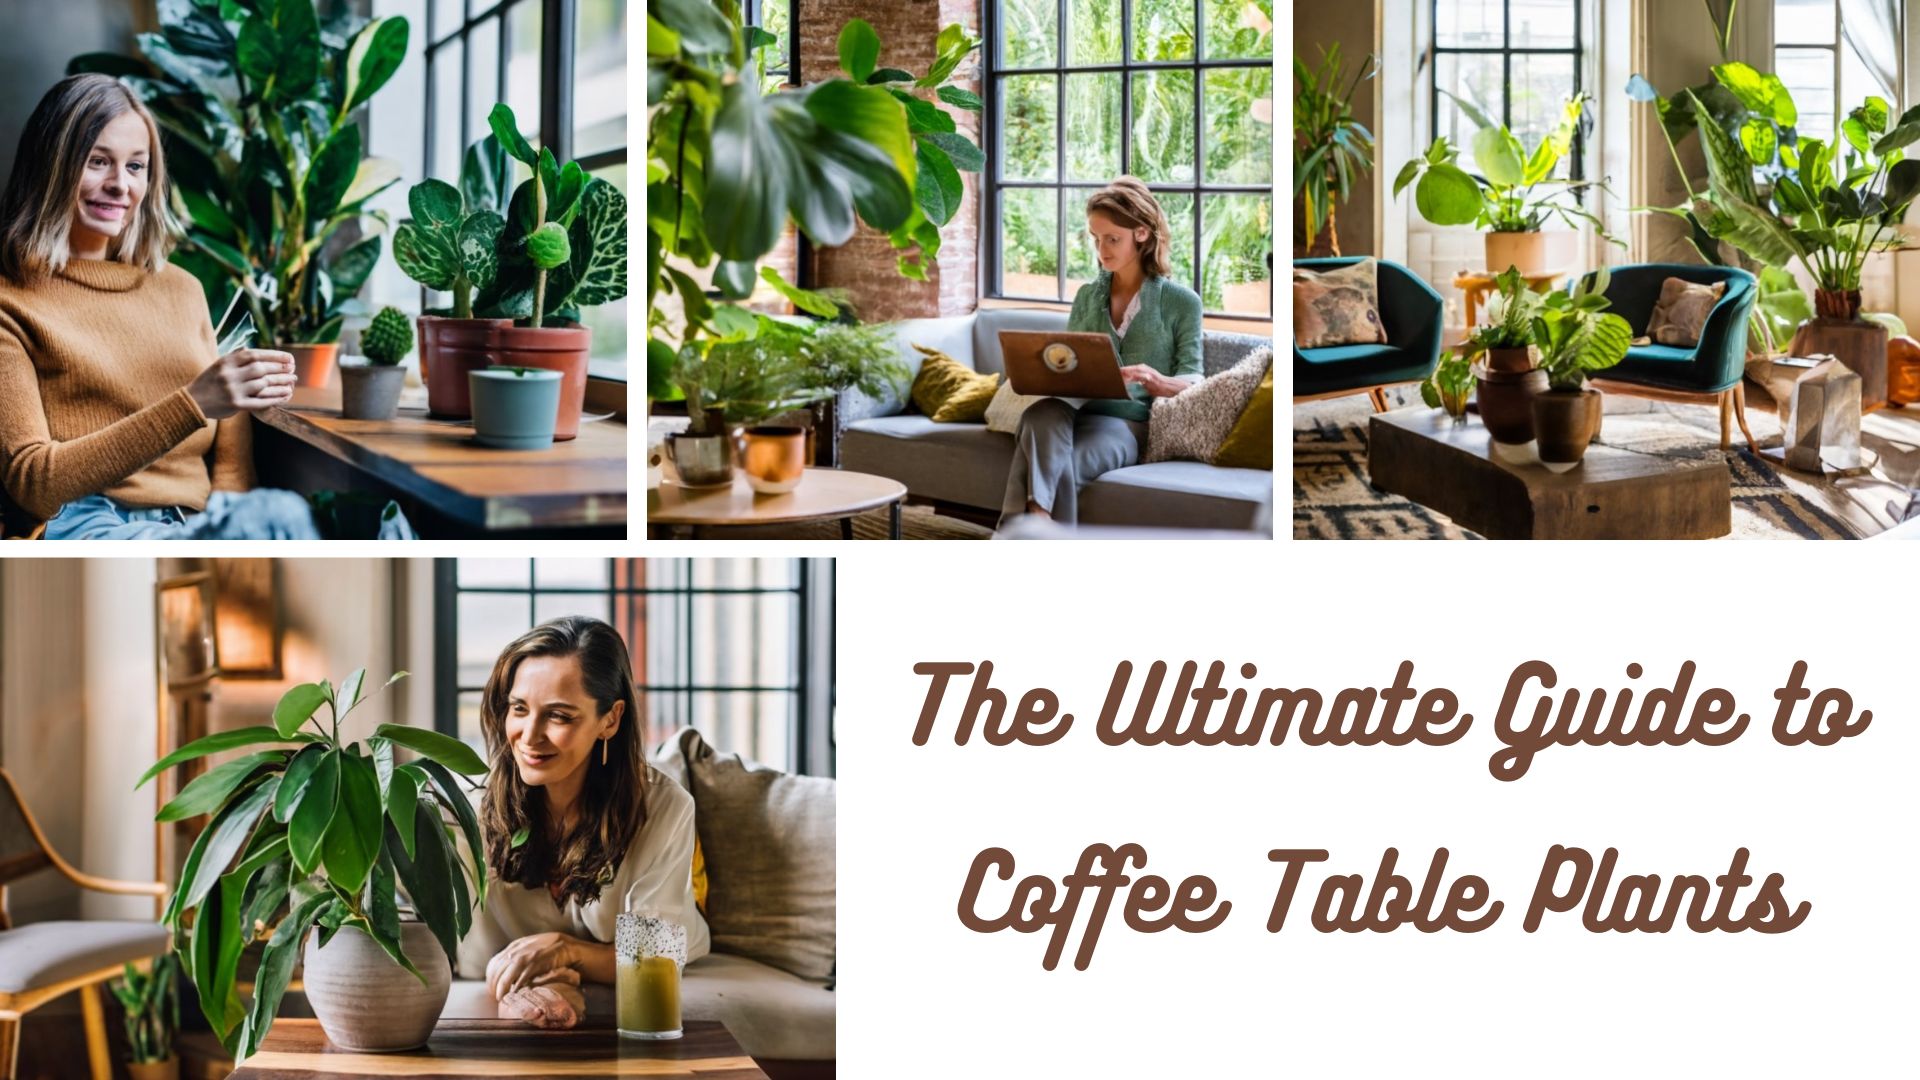 The Ultimate Guide to Coffee Table Plants